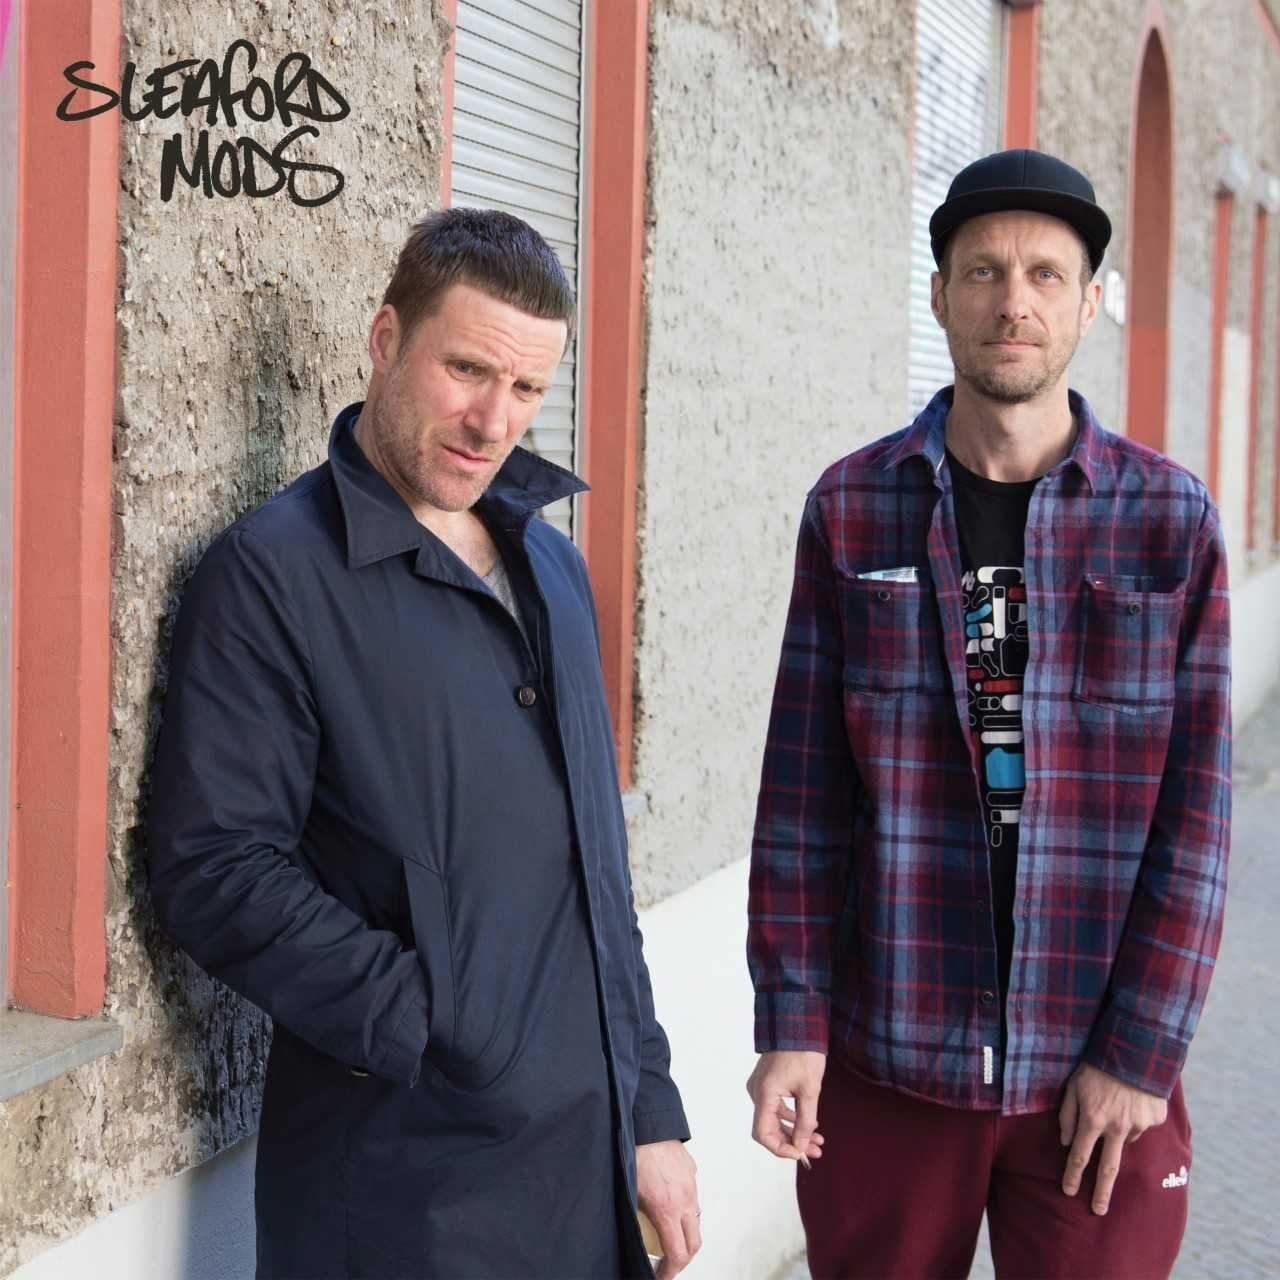 sleaford-mods-ep-review